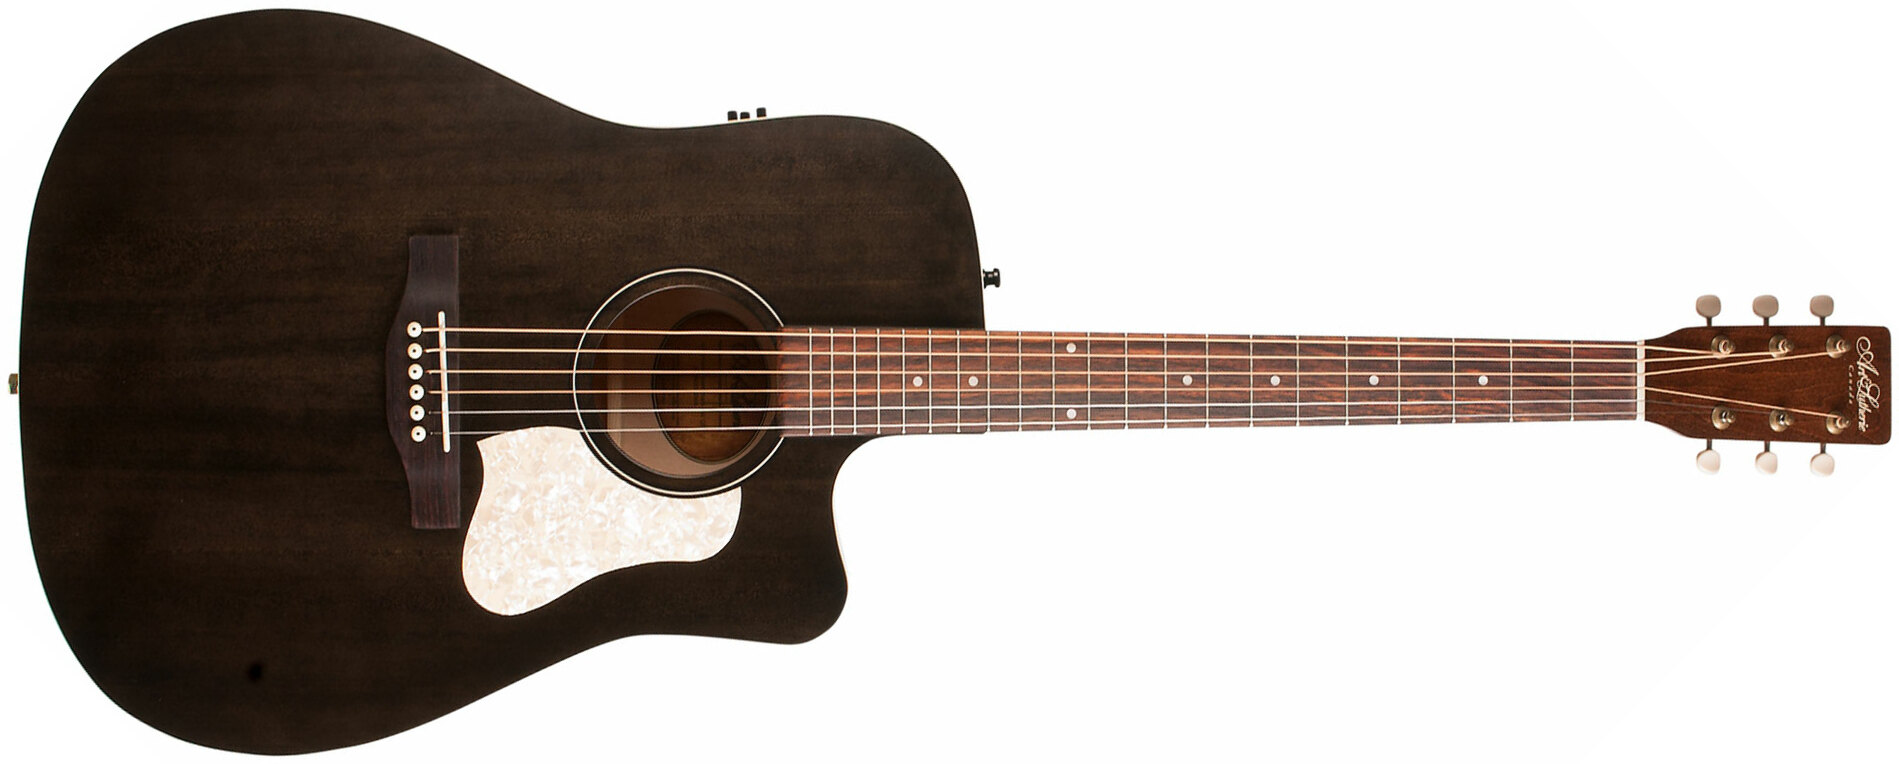 Art Et Lutherie Americana Cw Presys Ii Dreadnought Cedre Merisier Rw - Faded Black - Electro acoustic guitar - Main picture